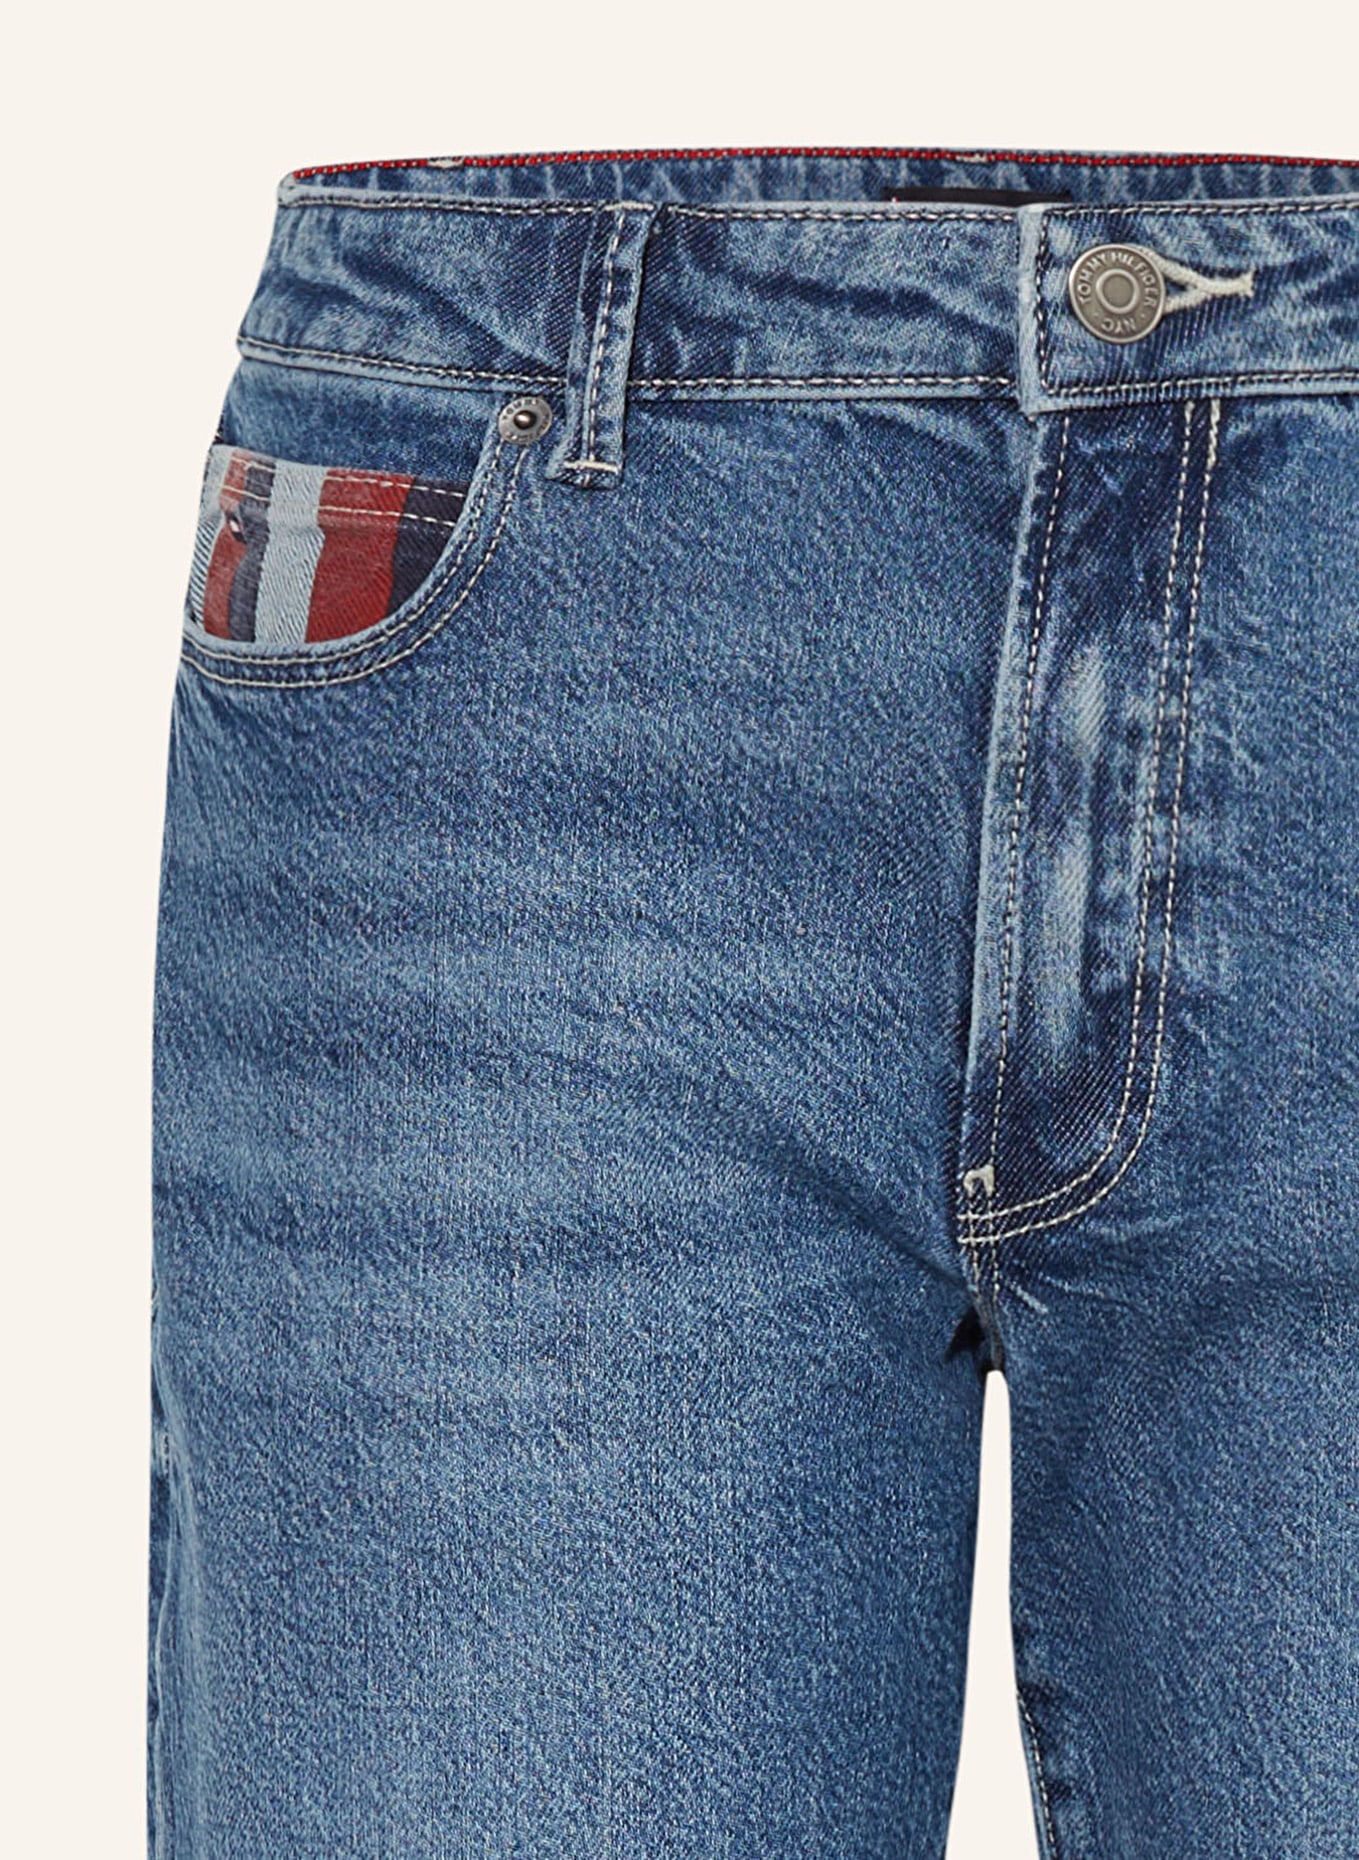 TOMMY HILFIGER Jeans Straight Fit, Farbe: C1O Saltandpepper (Bild 3)